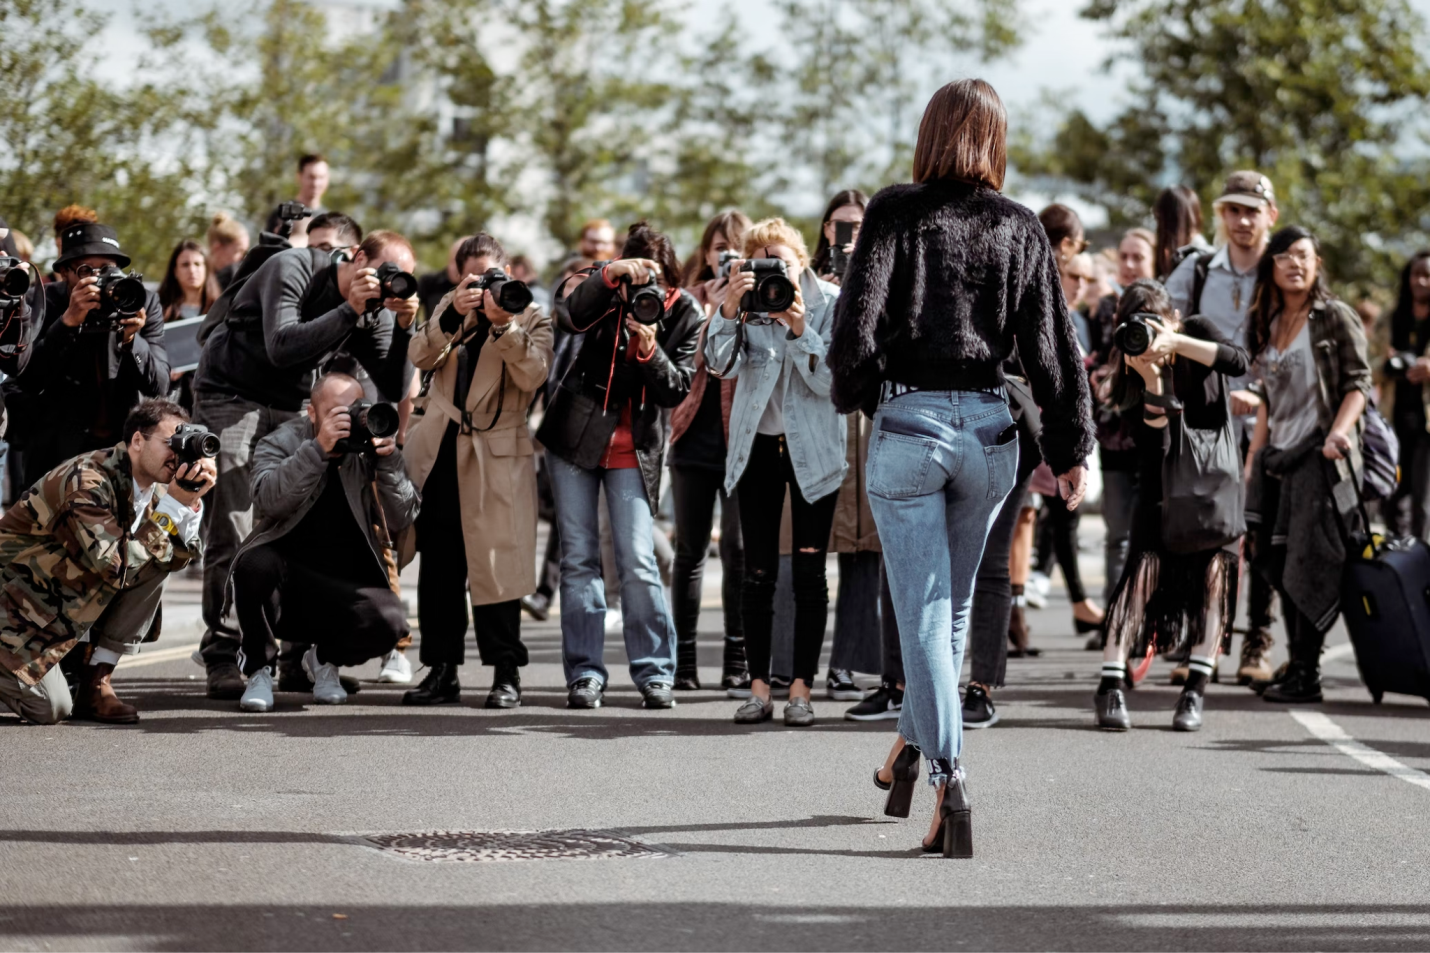 An image of a woman walking on the street with paparazzi taking pictures